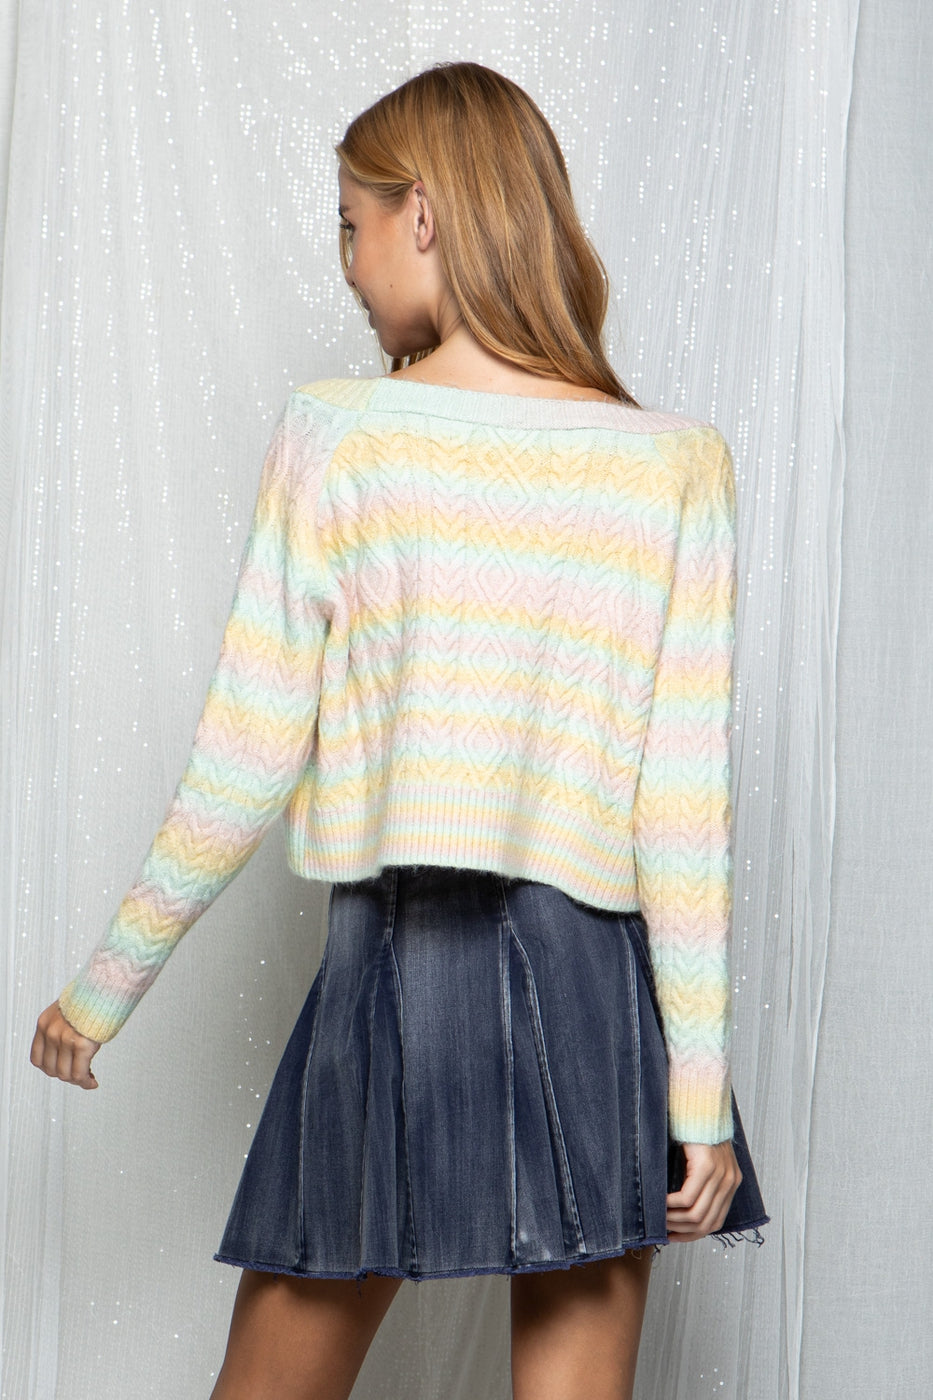 Over the Rainbow Striped Cardigan